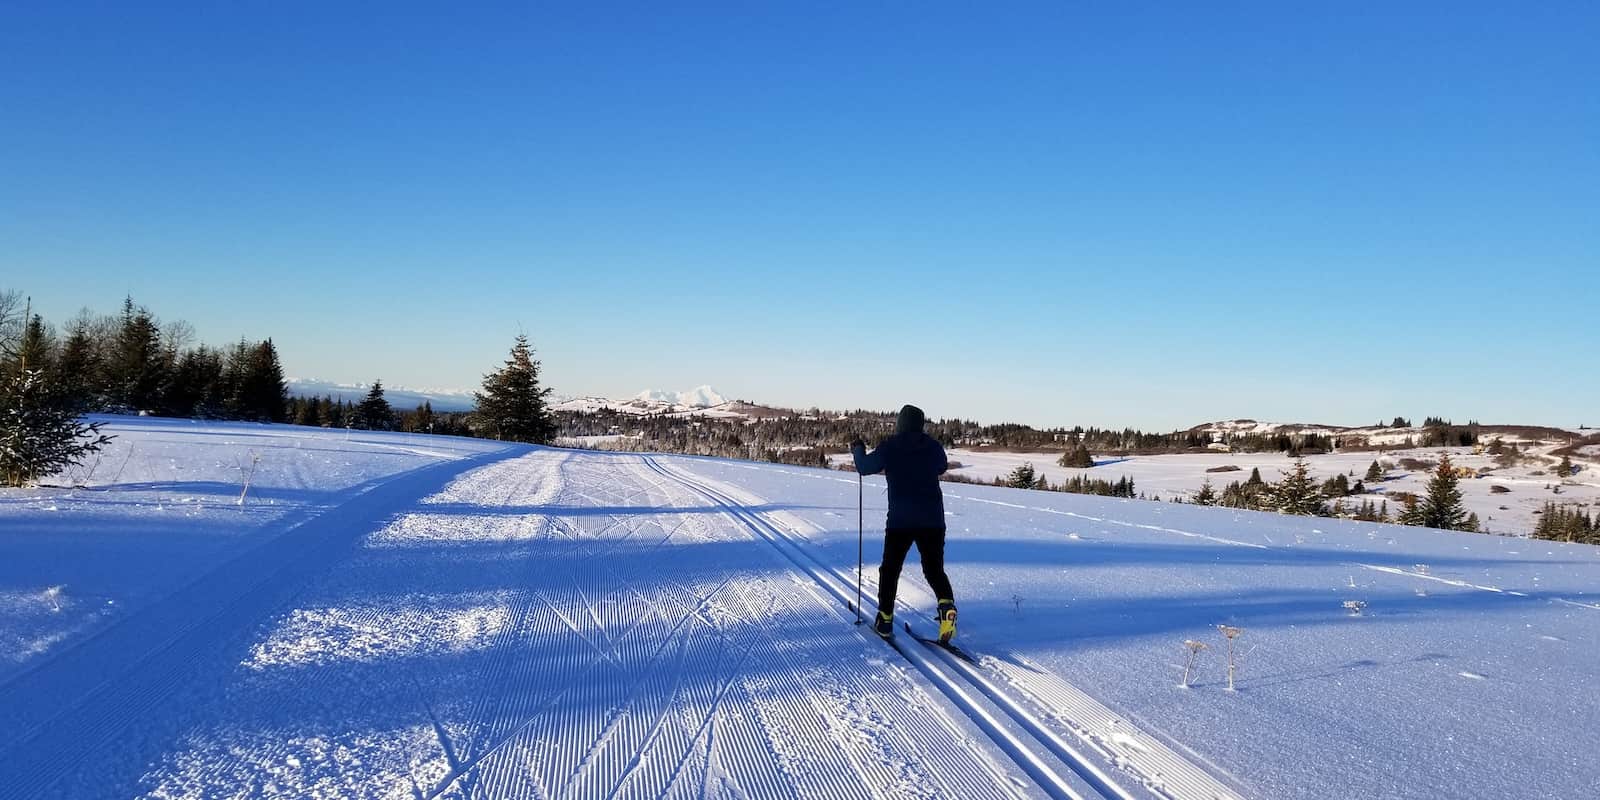 Cross country skiing at KNSC: Lookout Mtn Recreation Area